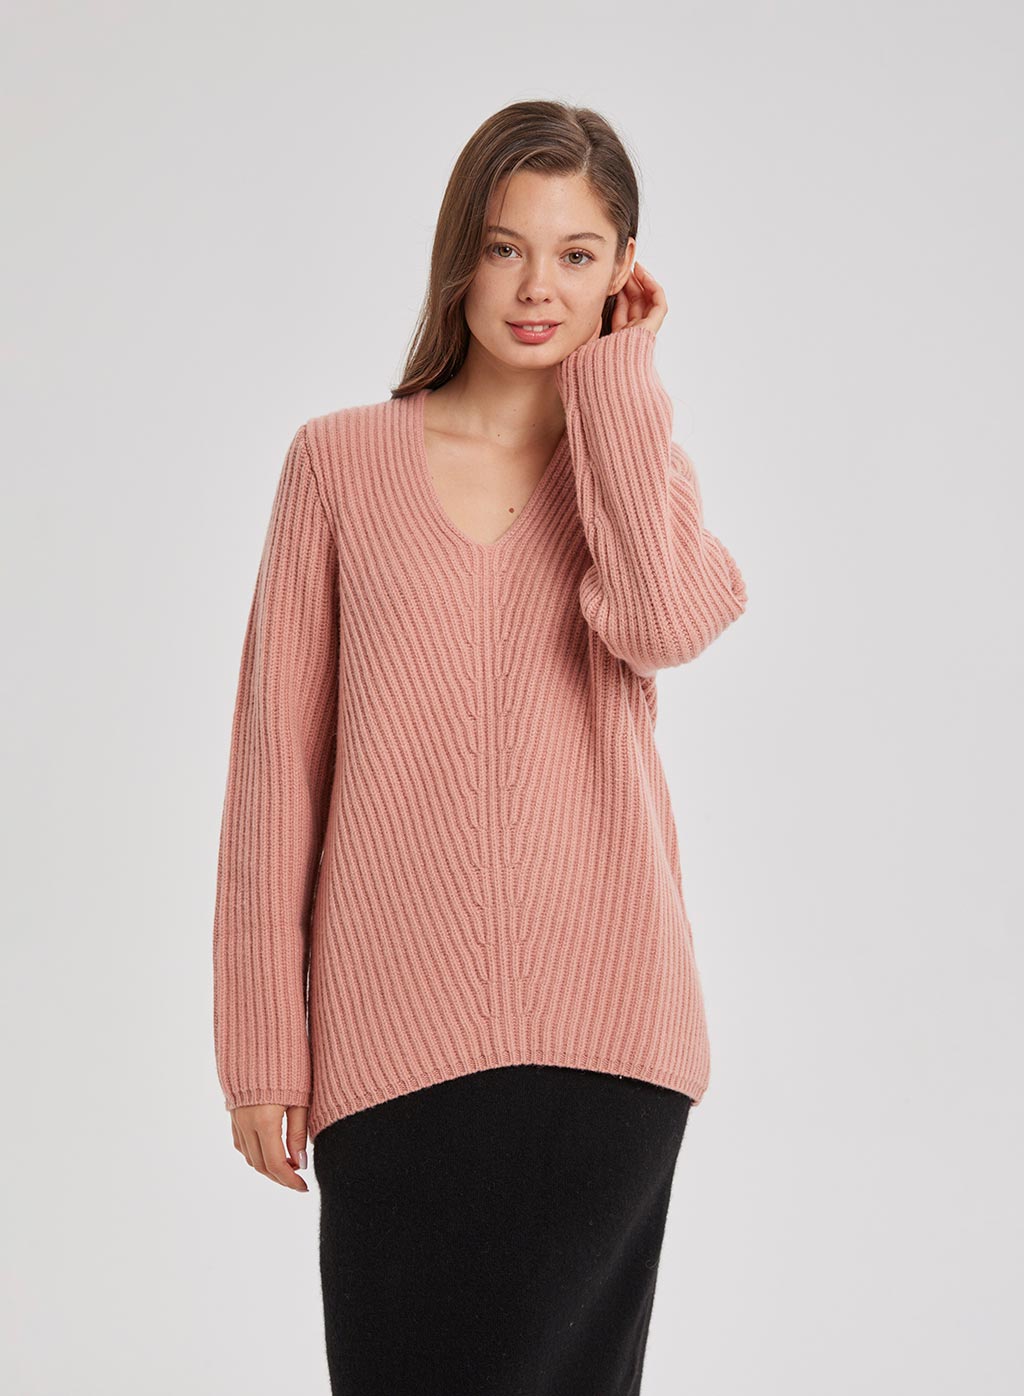 Scoop Neck Knit Sweater